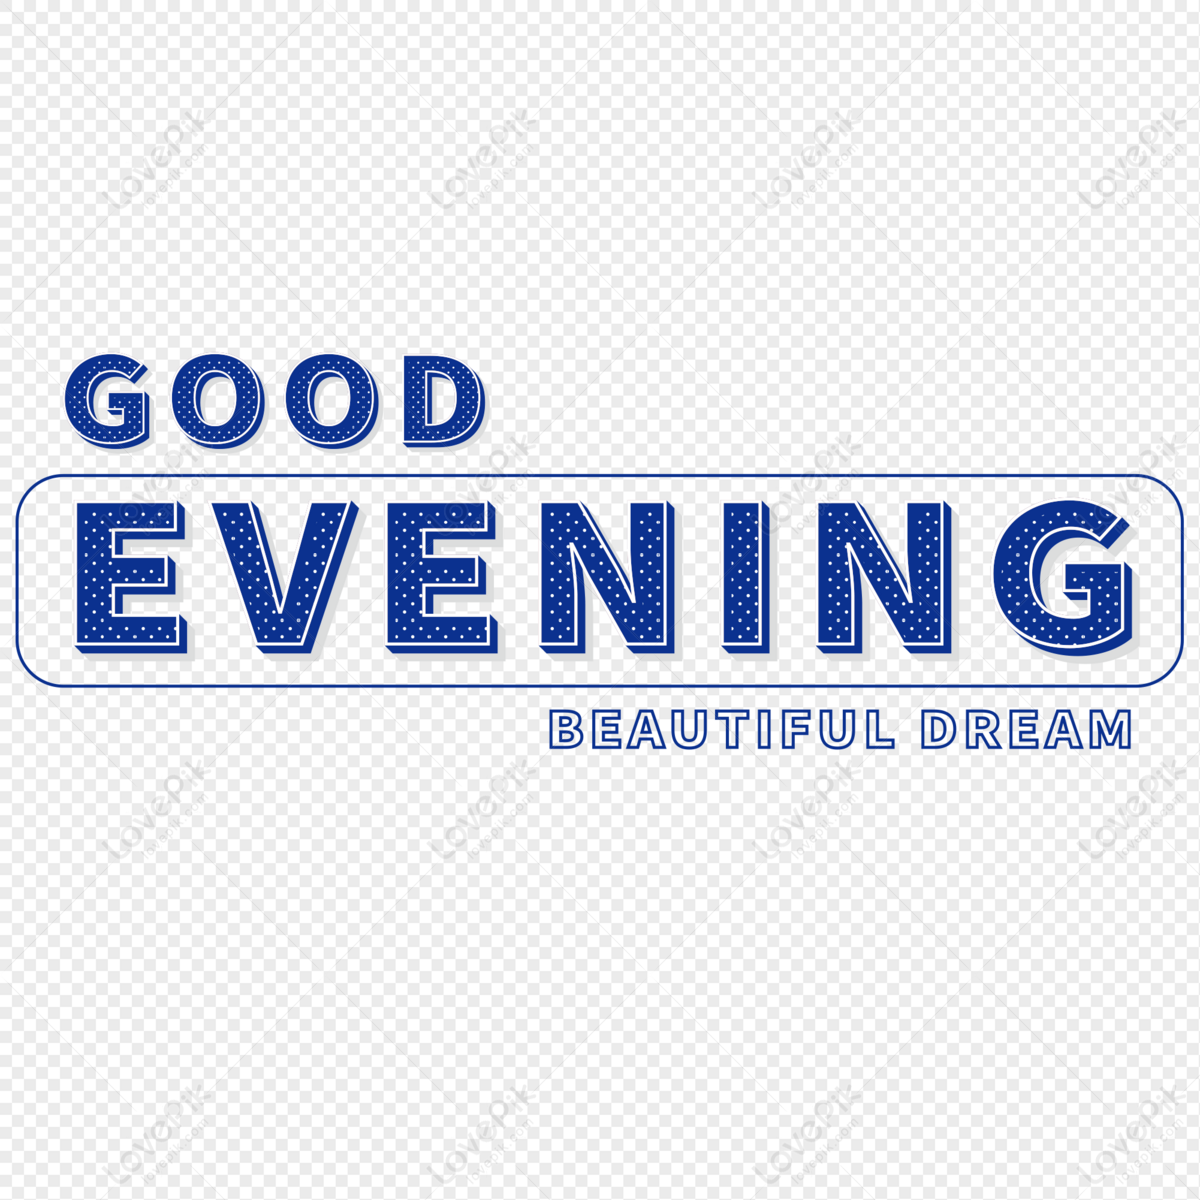 Good Evening PNG Hd Transparent Image And Clipart Image For Free ...